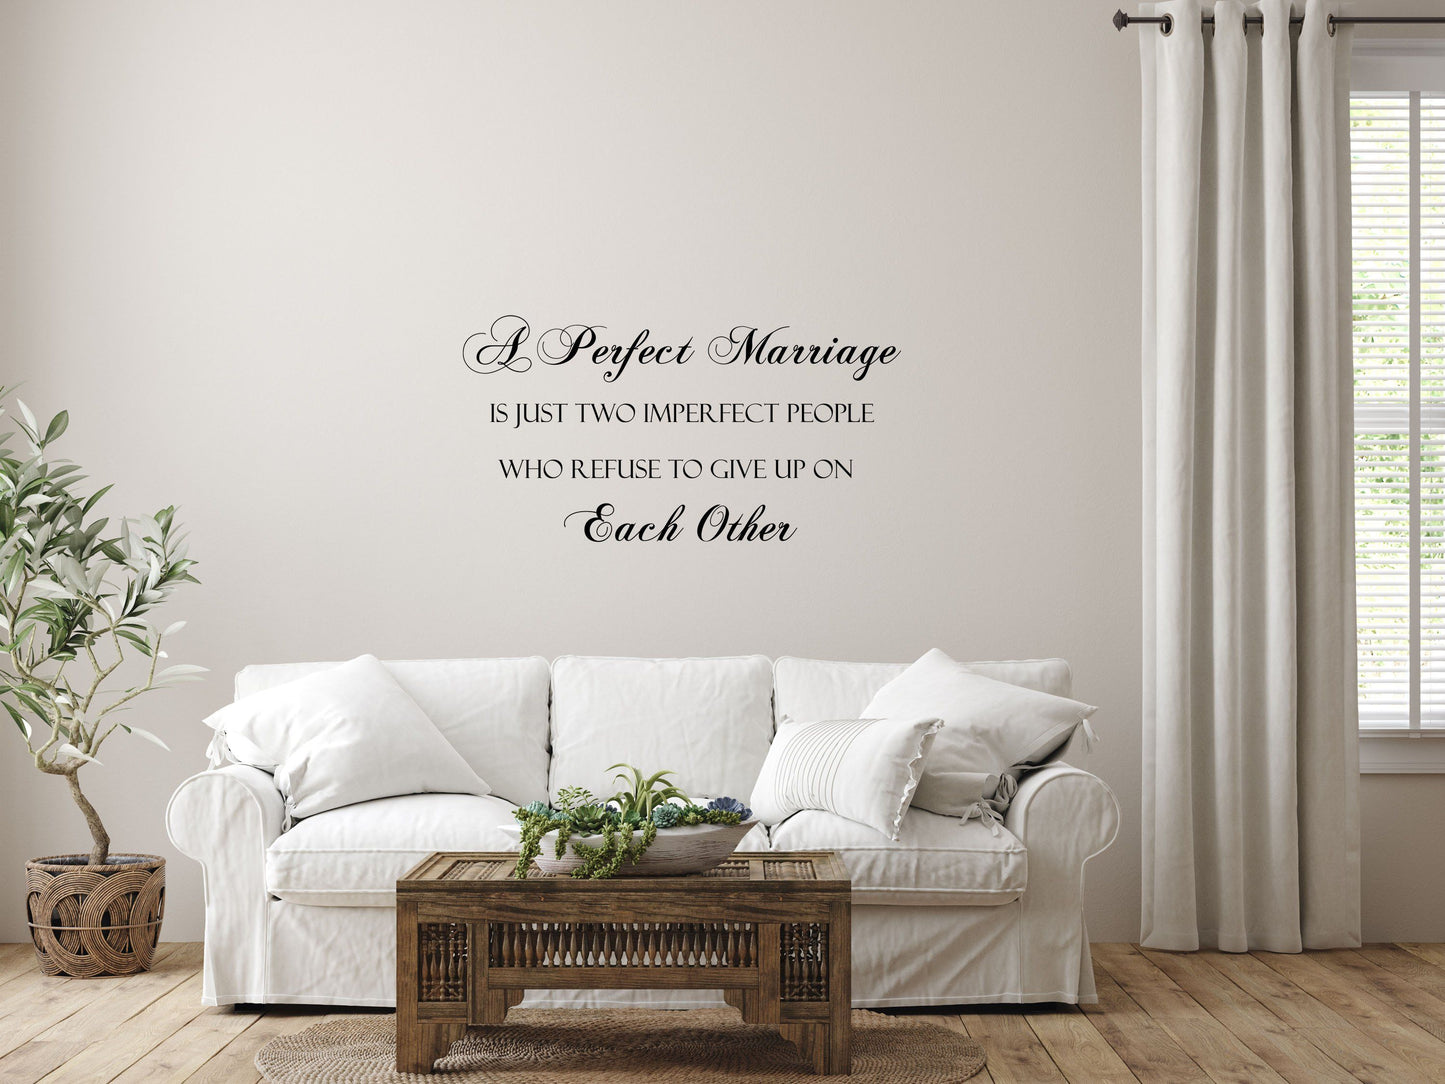 A Perfect Marriage Is Just Two Imperfect People Bedroom Wall Quote Decal - Inspirational Wall Signs Vinyl Wall Decal Done 